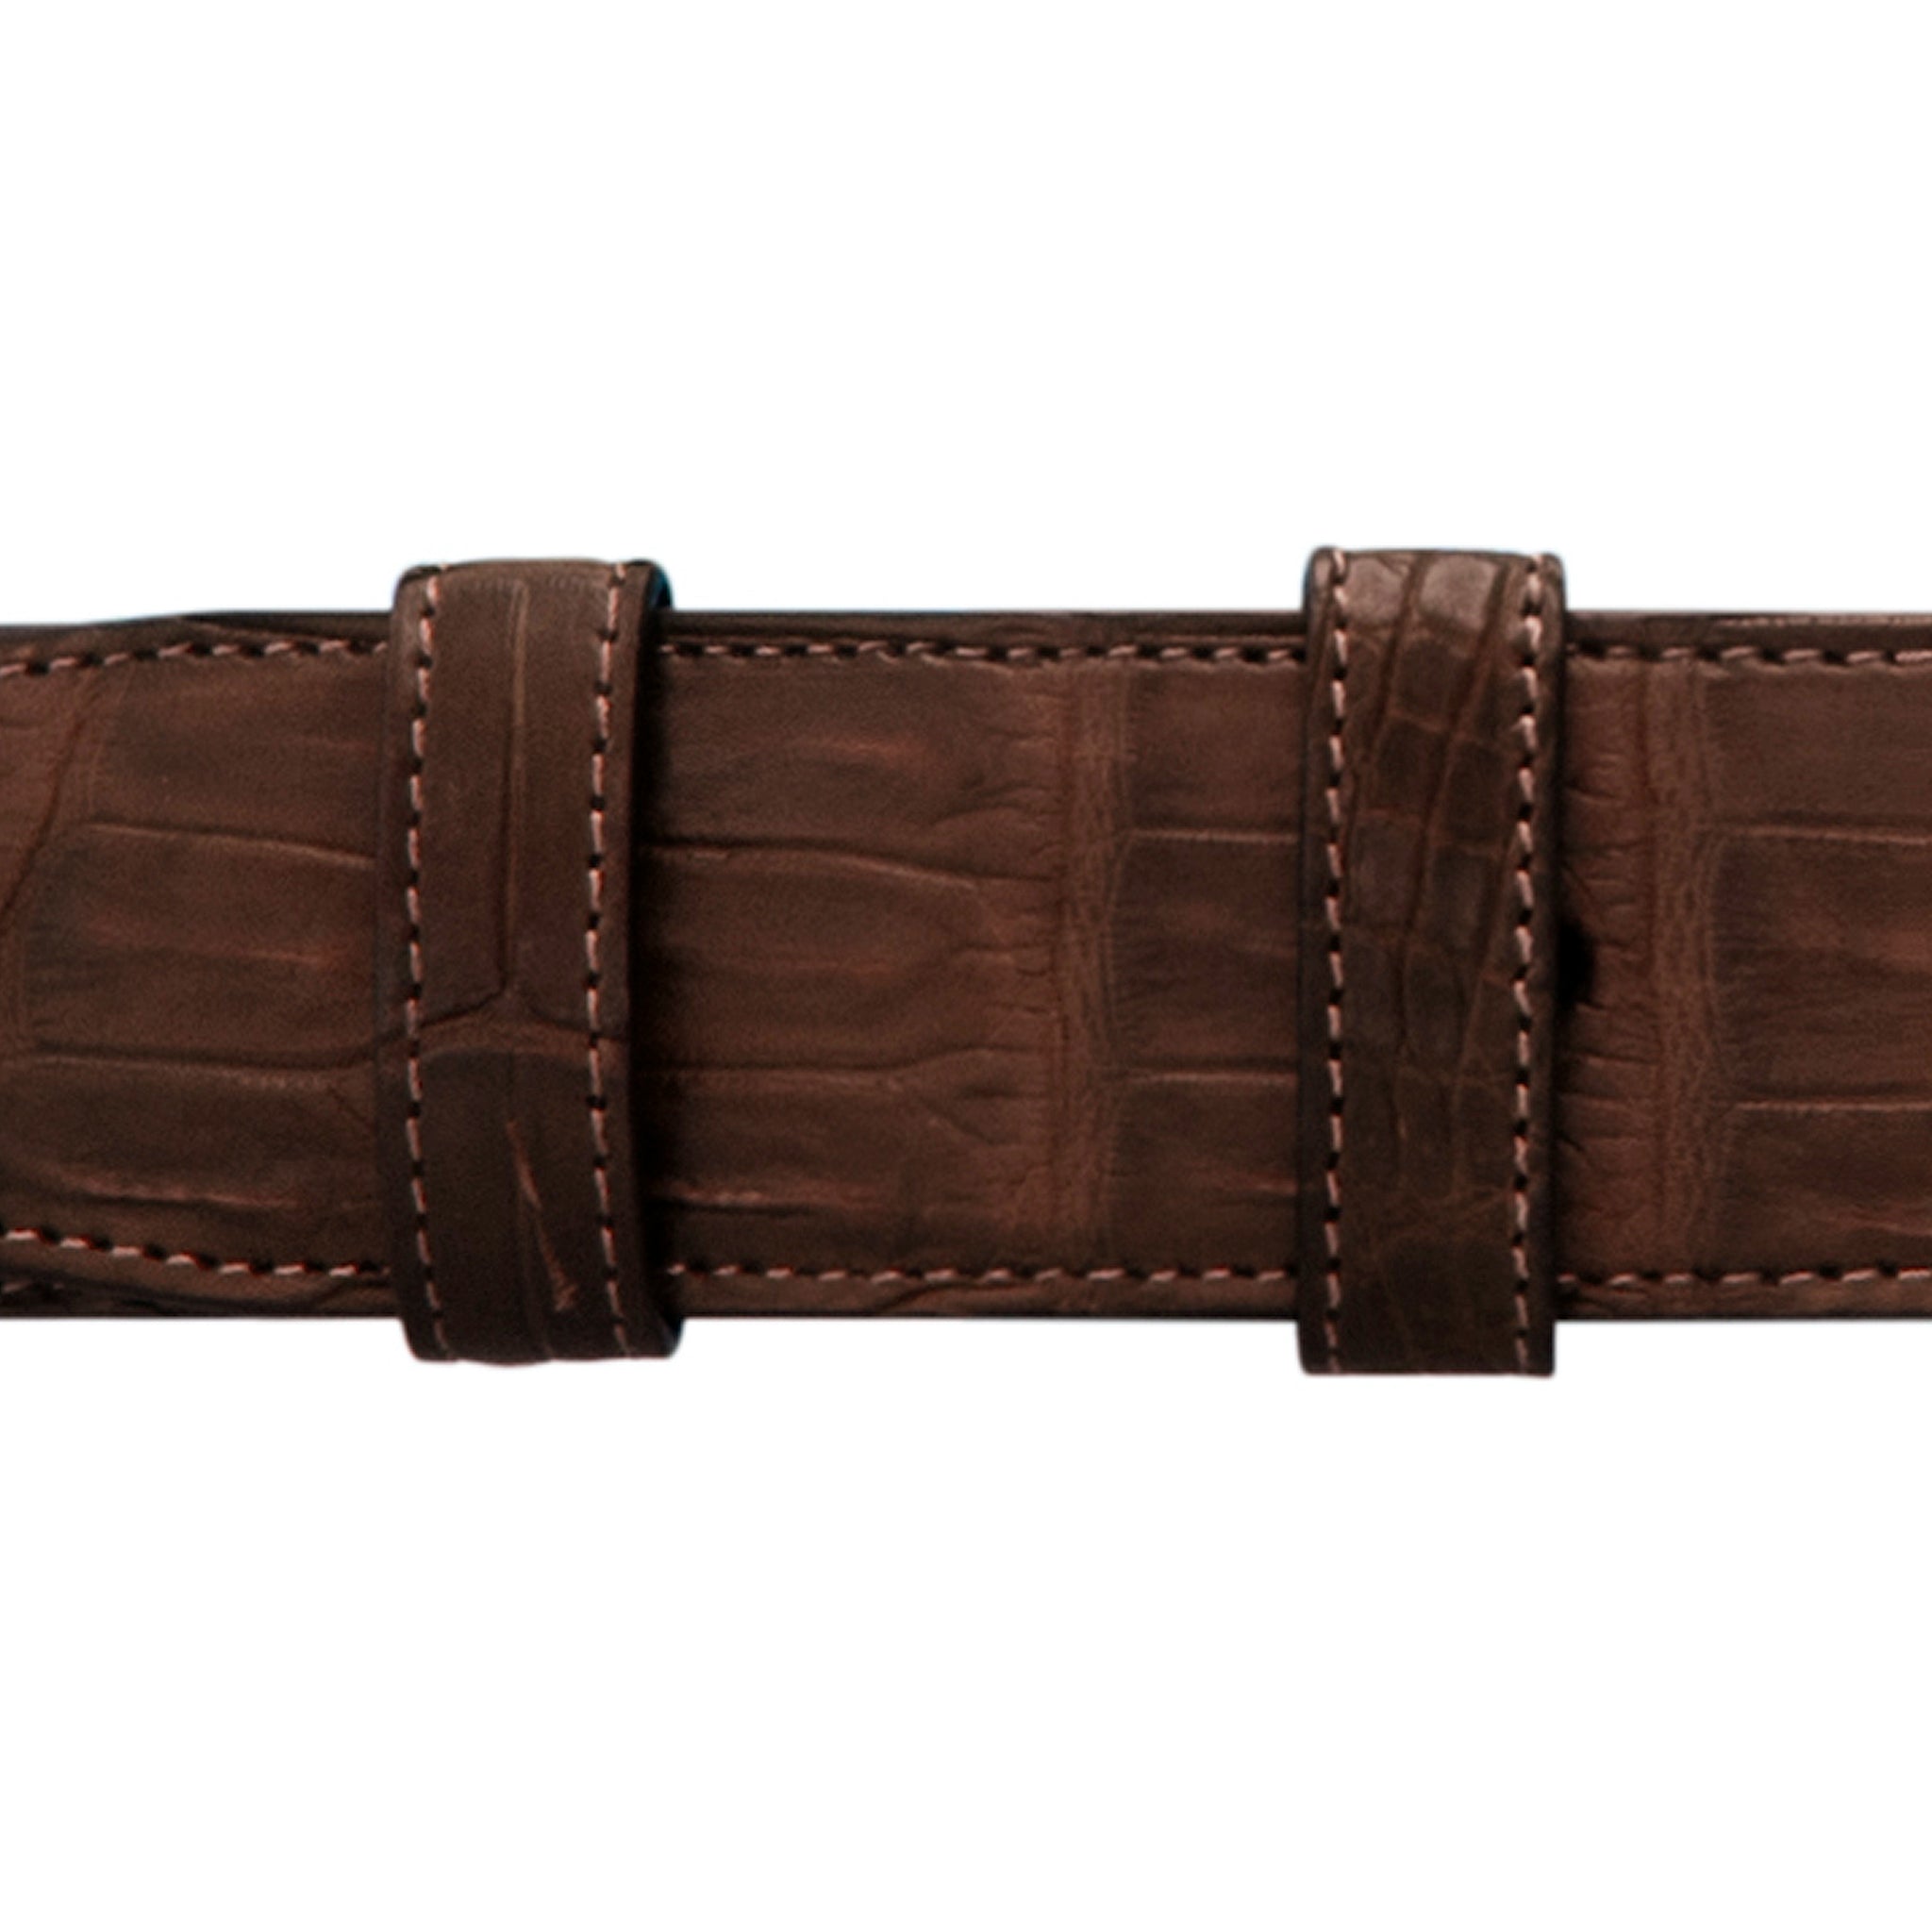 1 1/2" Cognac Classic Belt with Crawford Casual Buckle in Brass